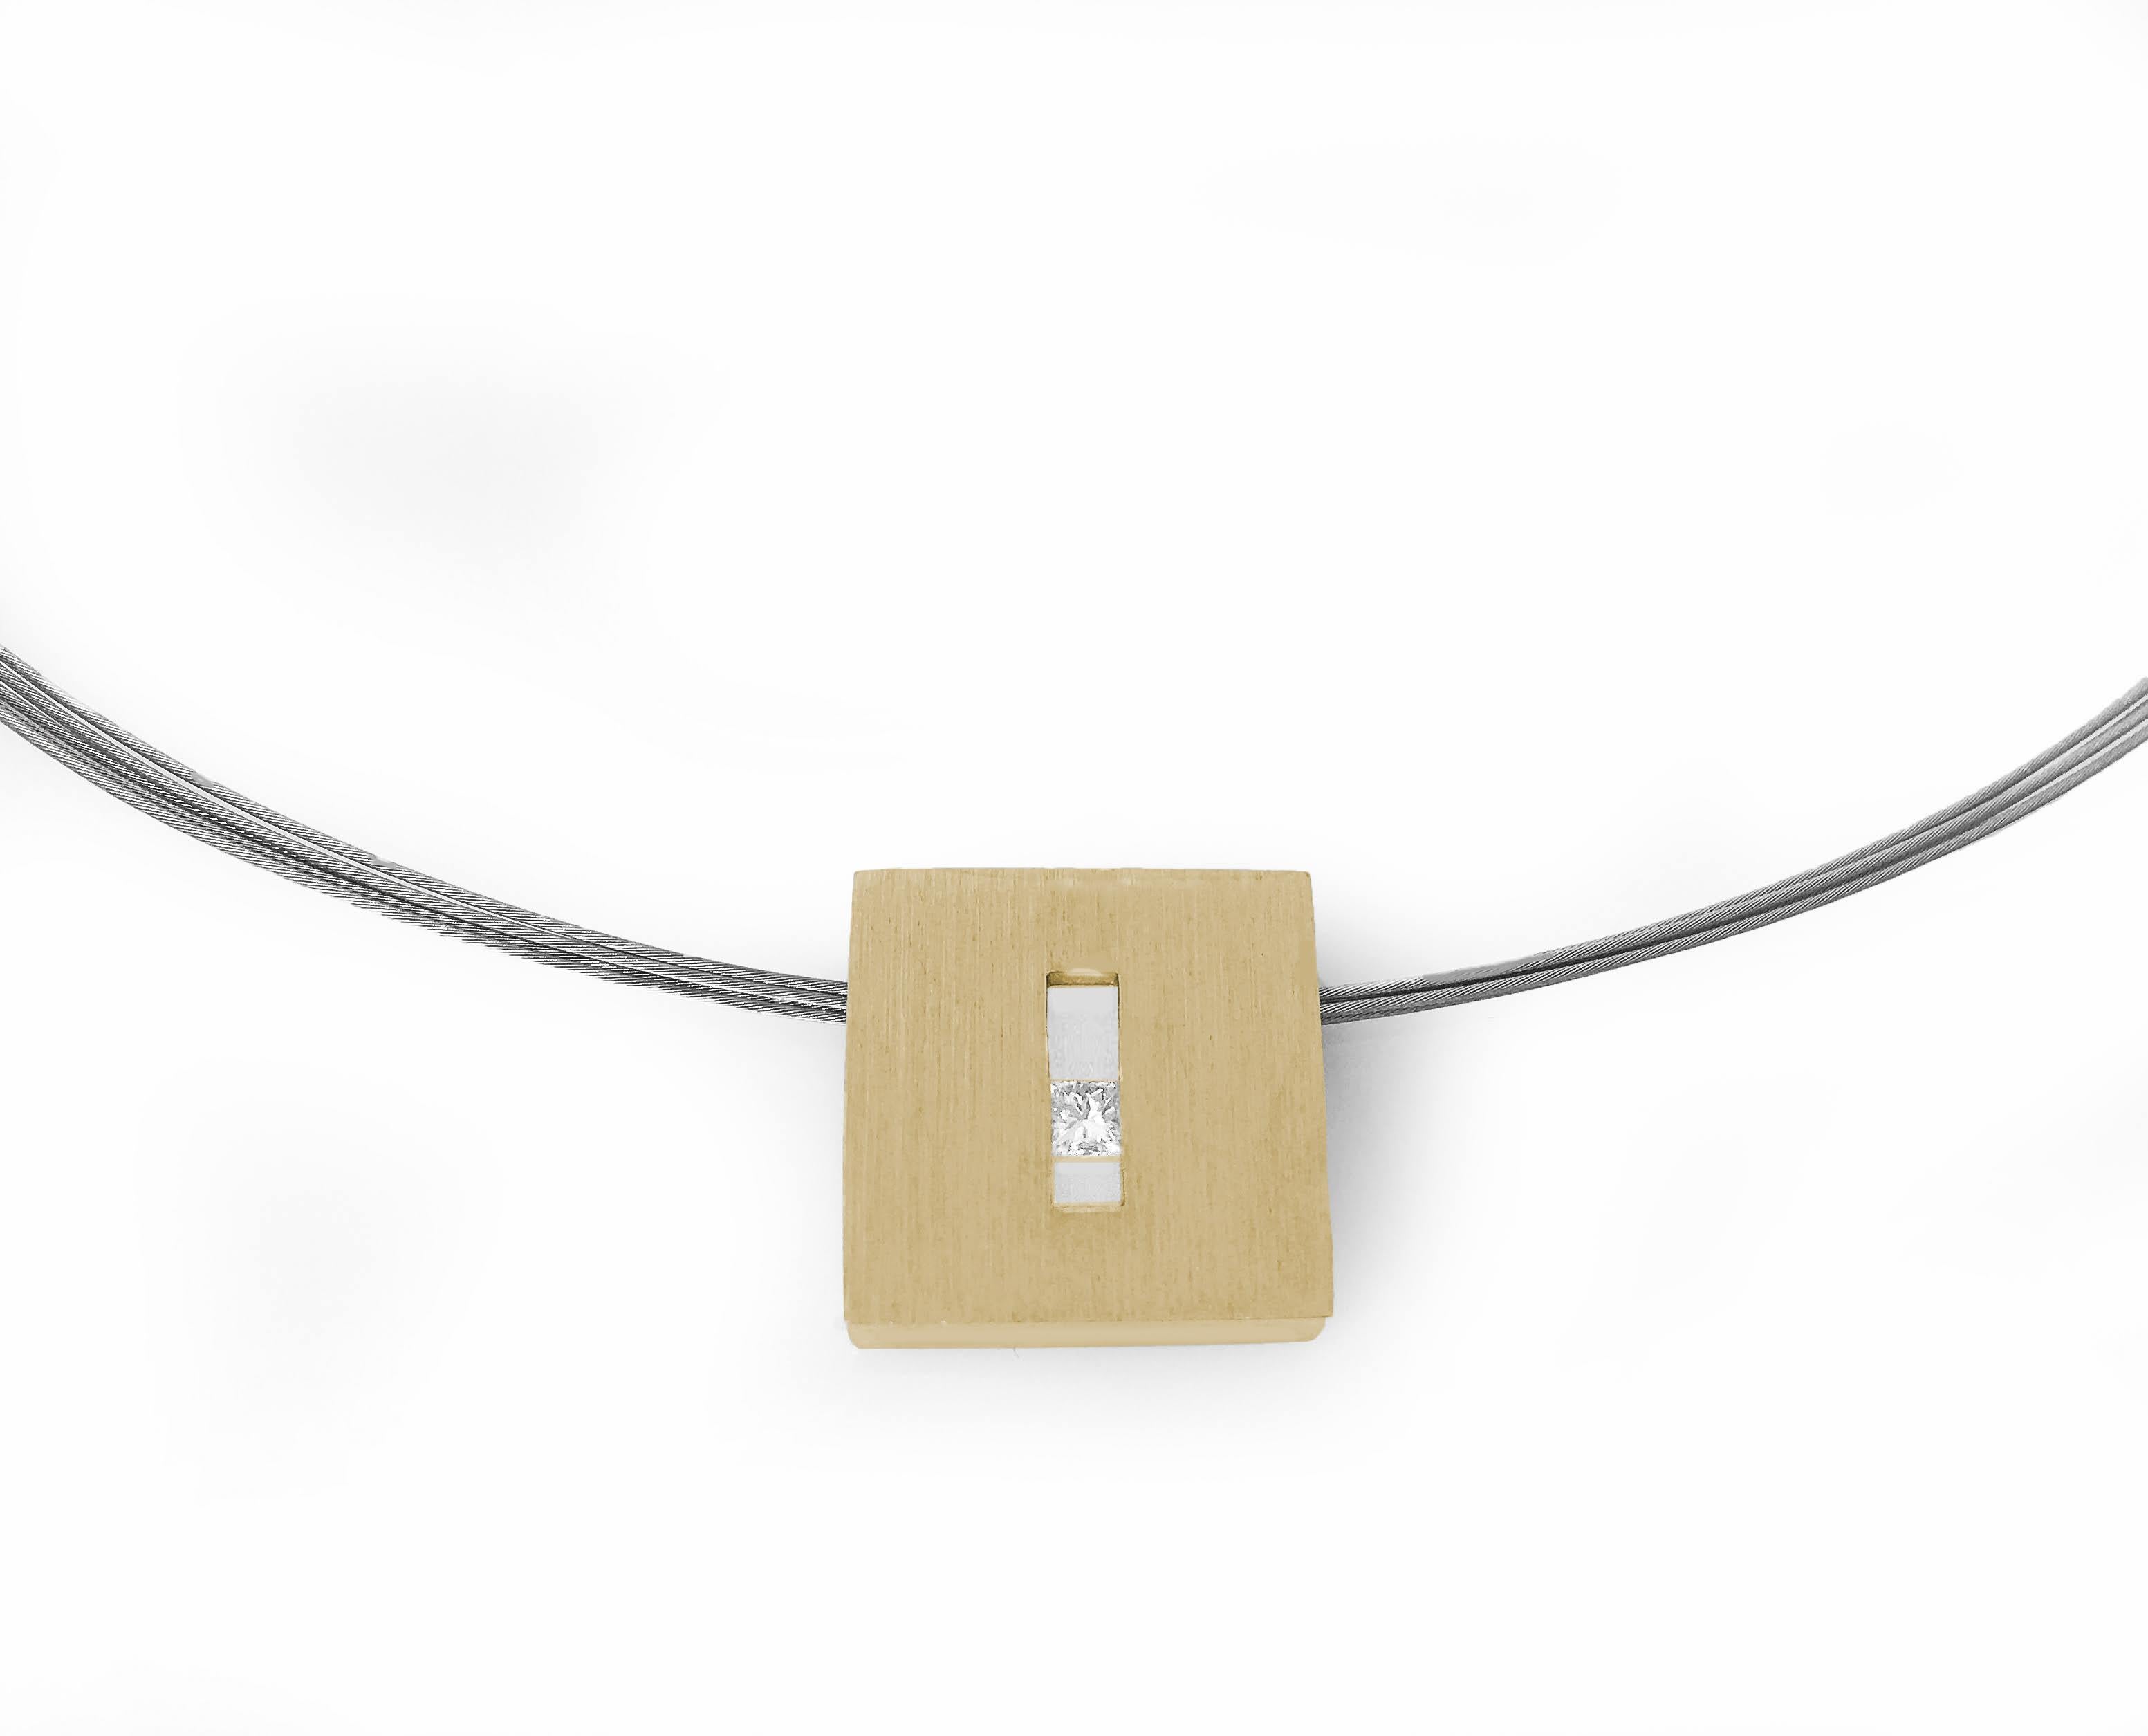 This Princess Diamond in Yellow Gold Suspended Square Pendant is part of our Suspension Collection. Modern and architecturally inspired, this square pendant is shown in yellow gold with a brushed finish and set off center with an approximately